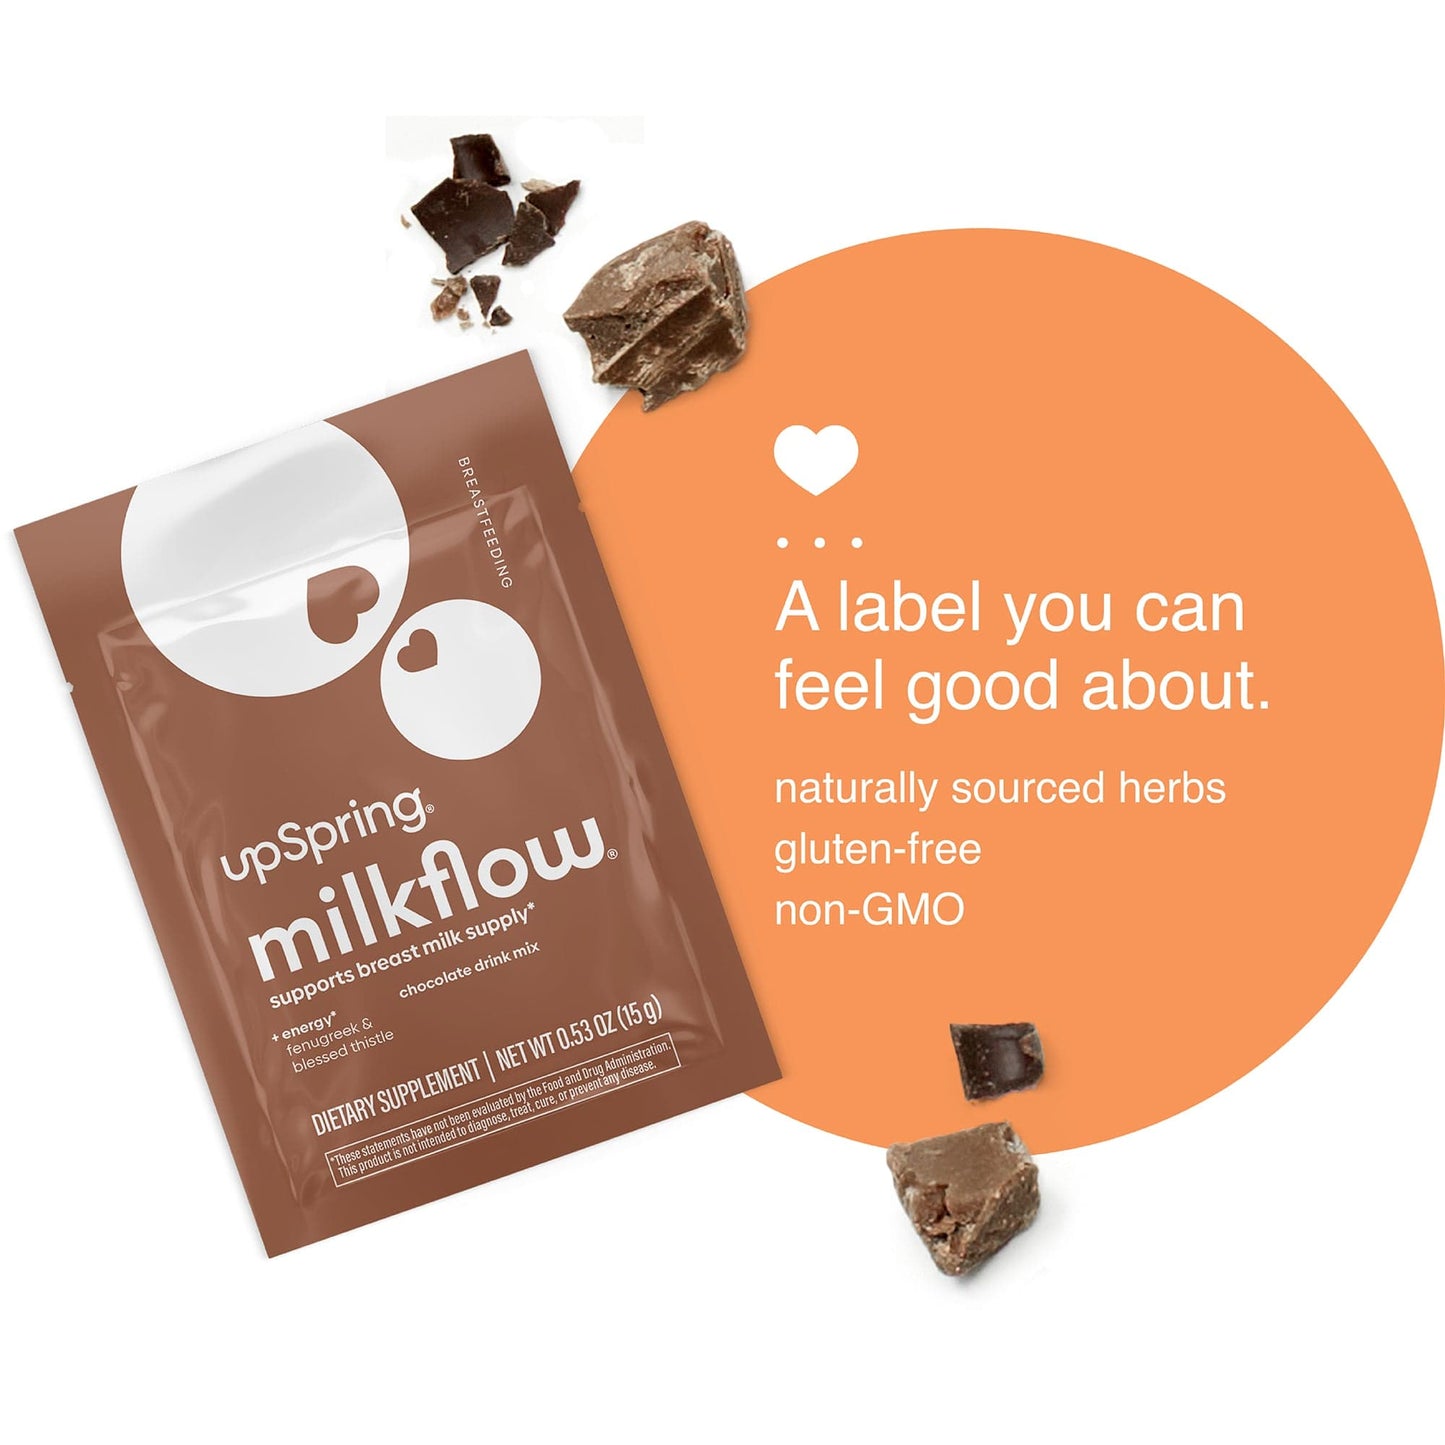 MilkFlow Chocolate contains naturally sourced herbs, gluten-free, and non-GMO